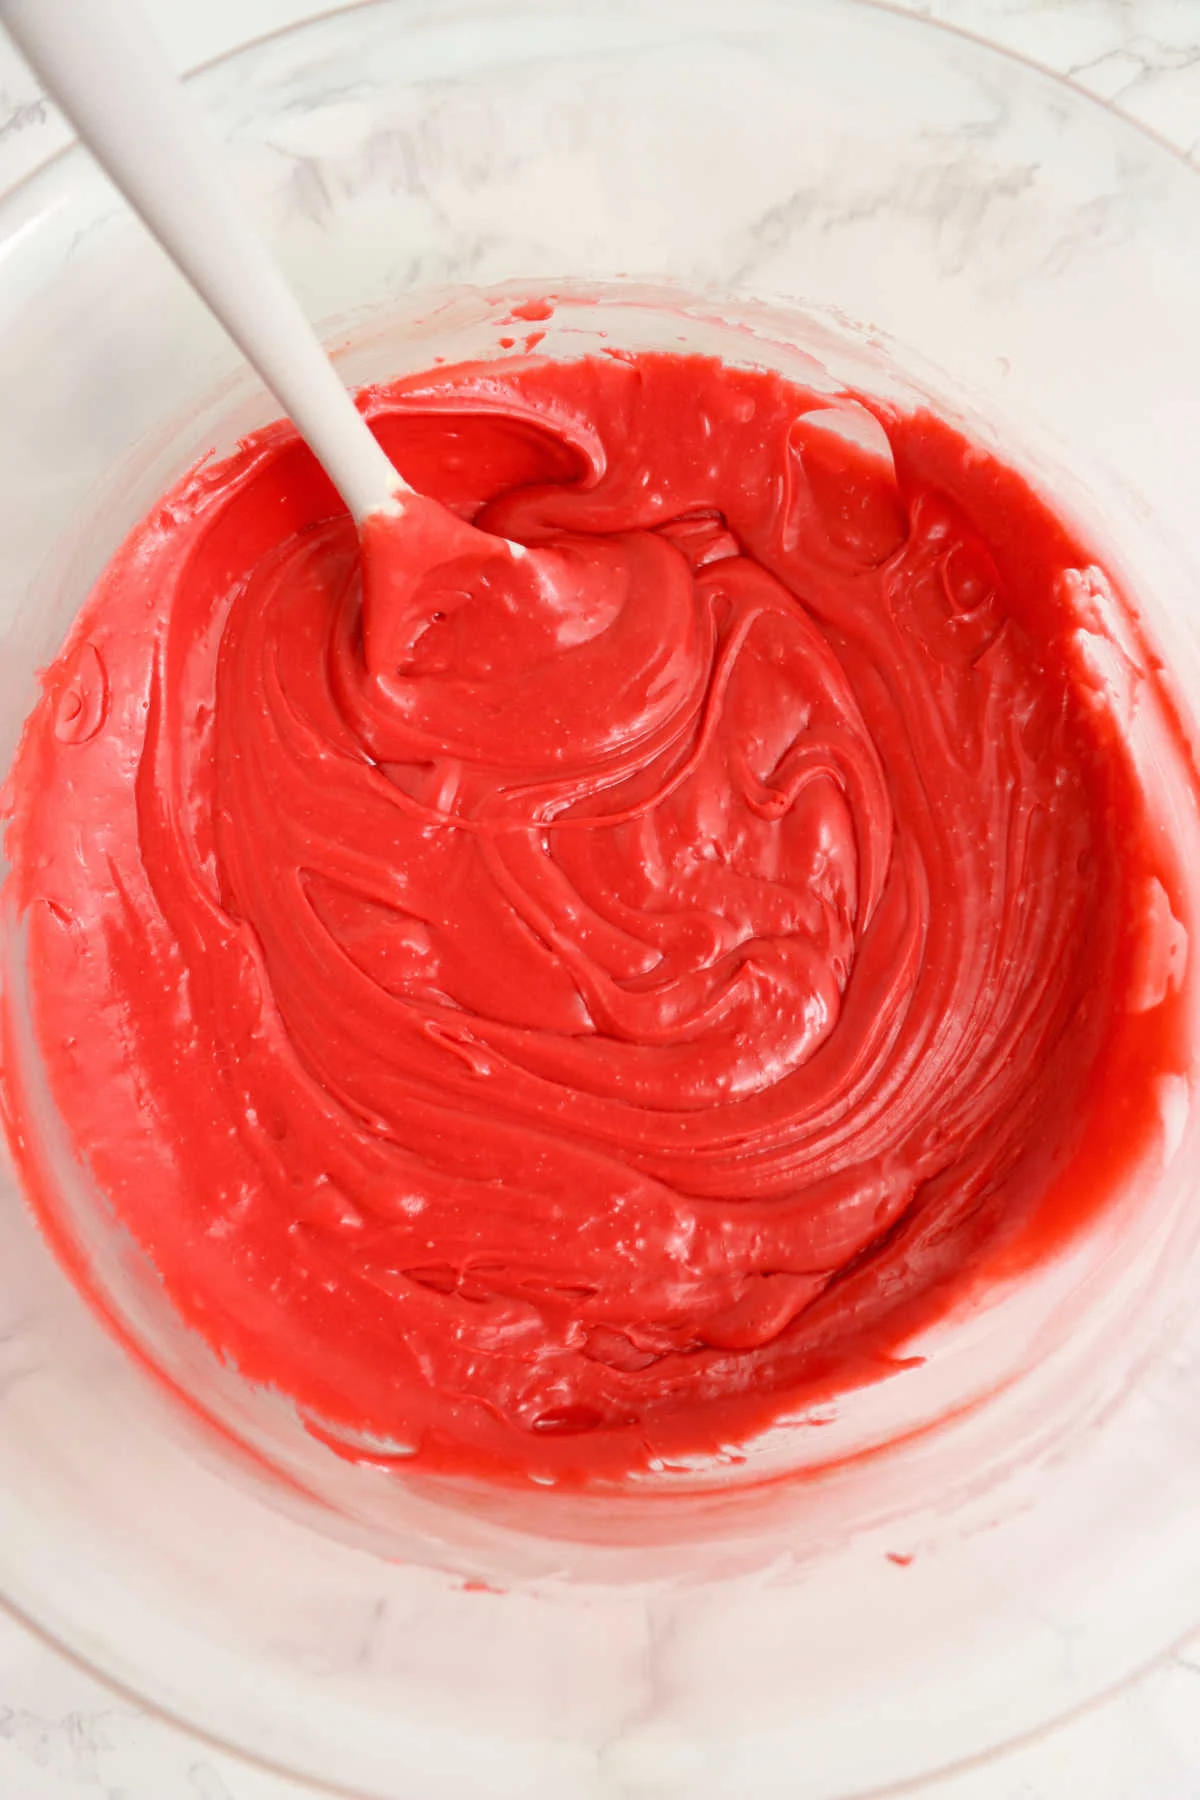 Red velvet cake mix stirred into melted chocolate making a smooth bright red mixture.